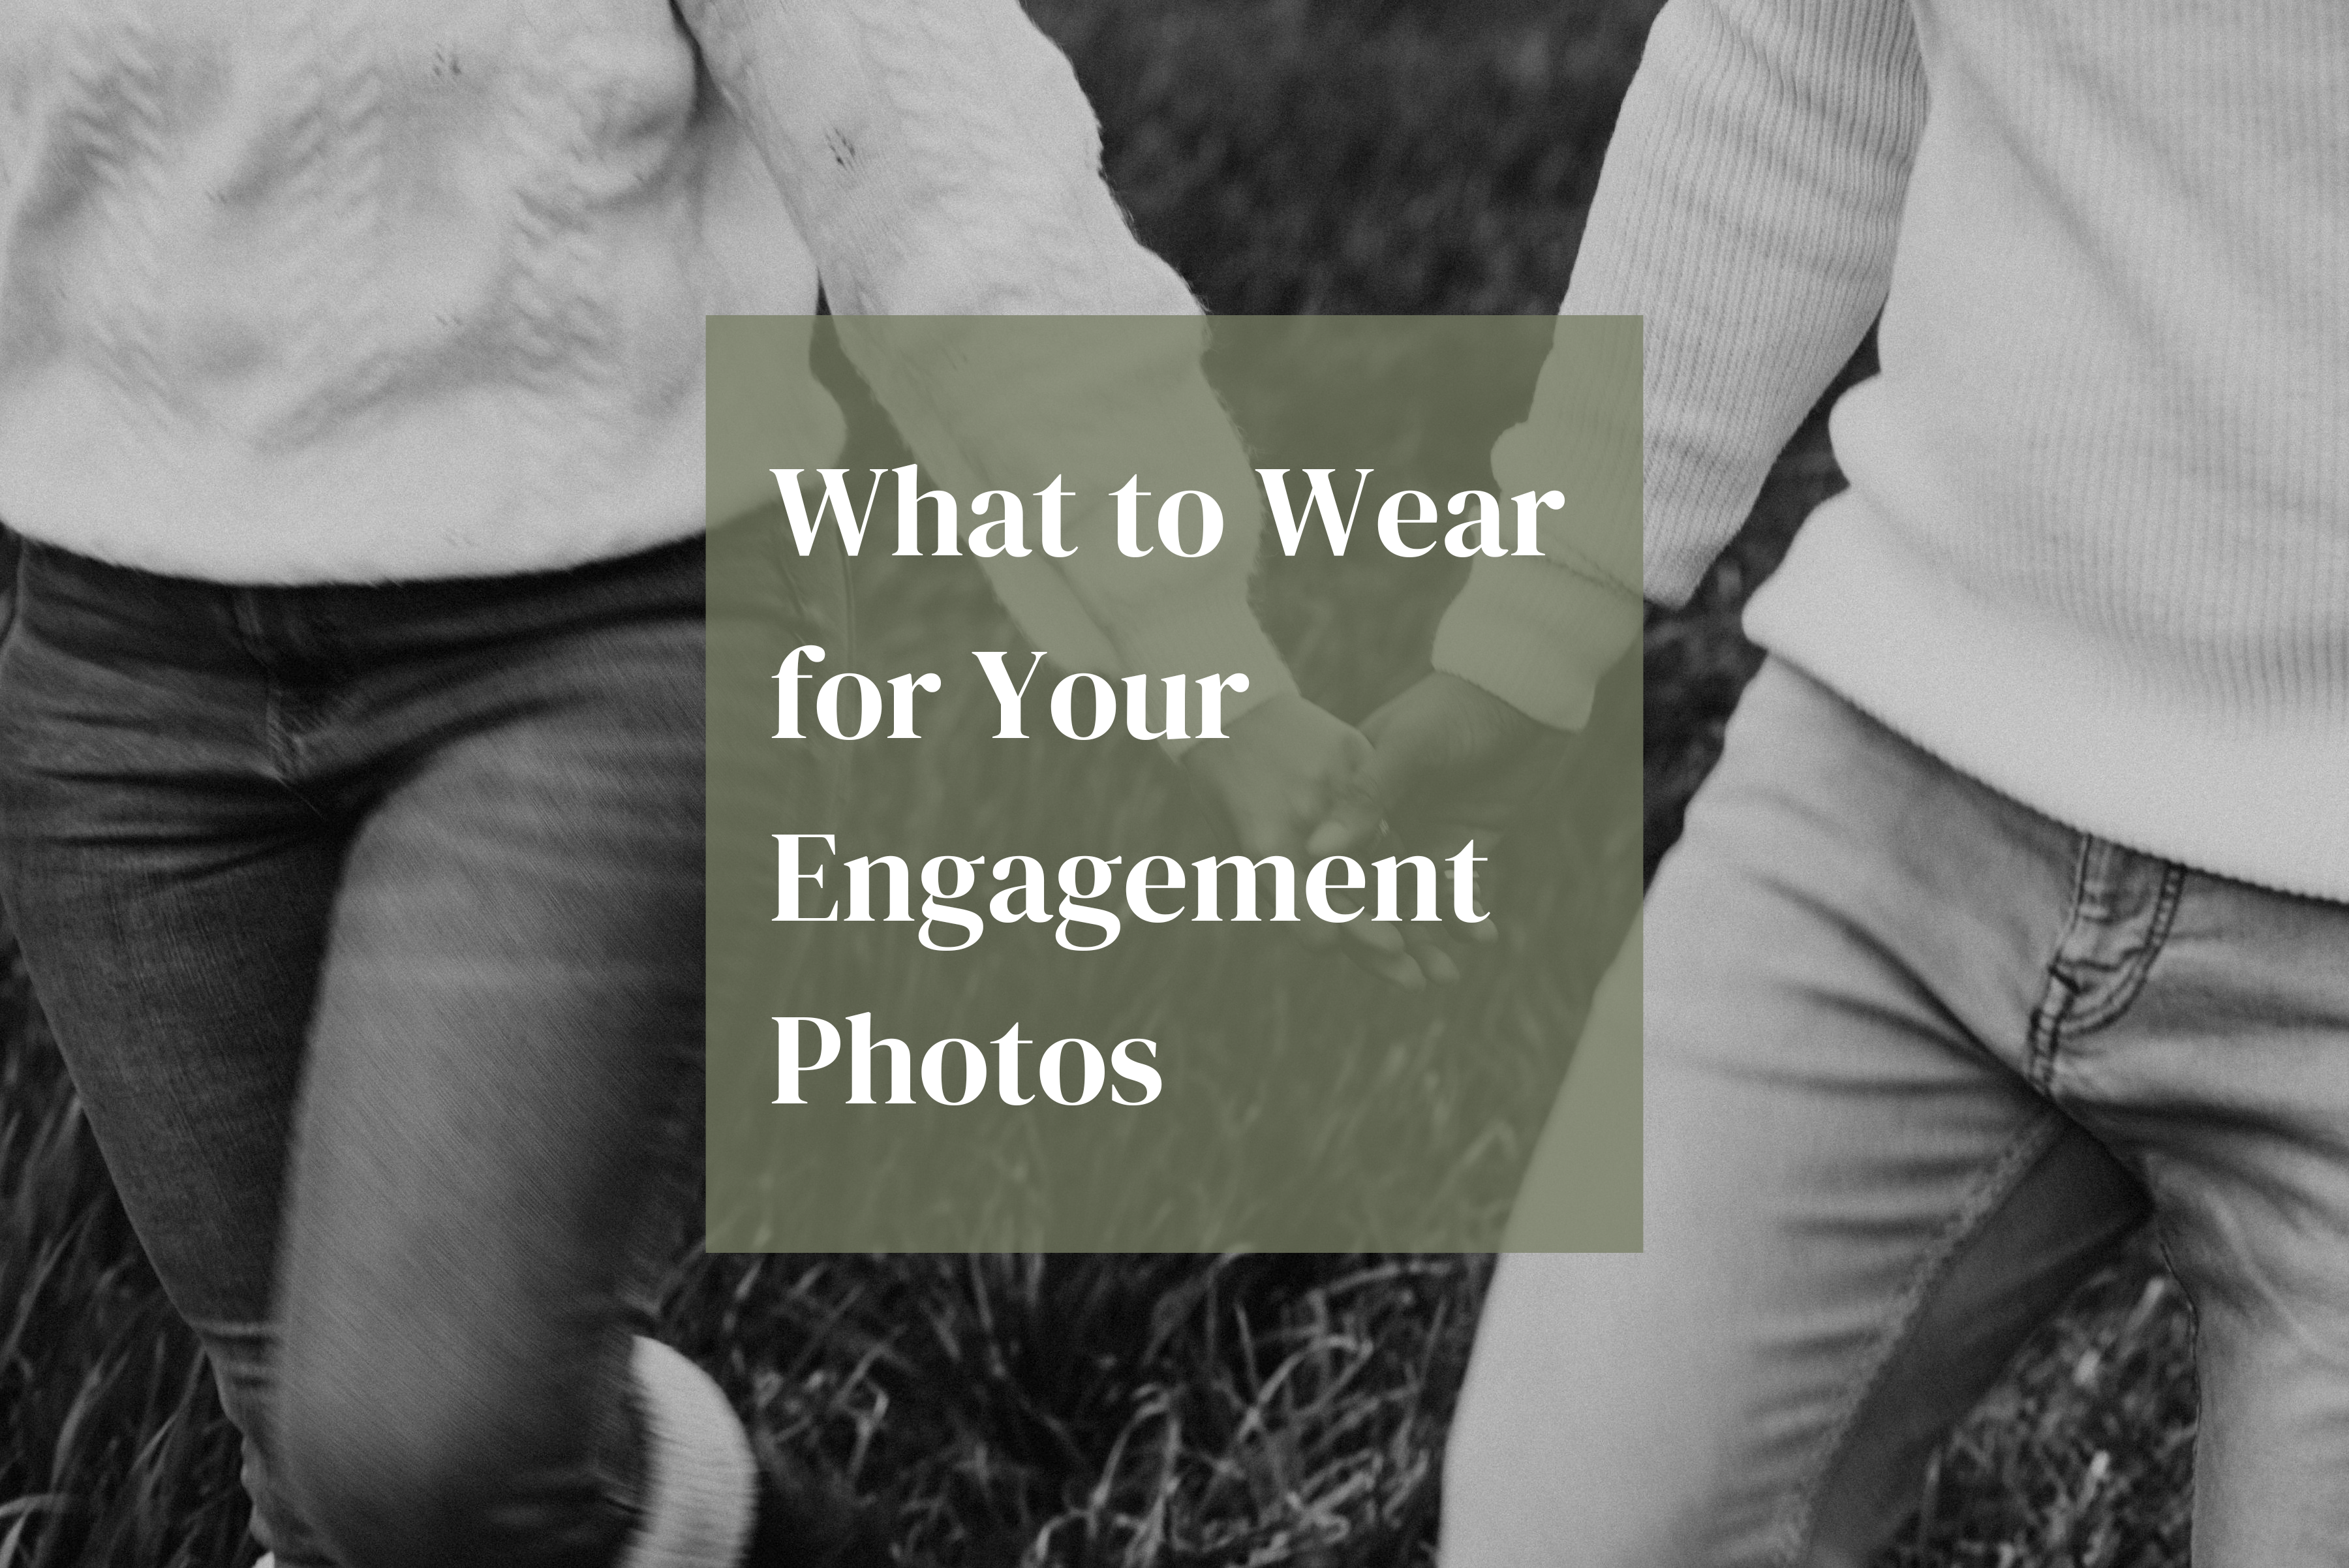 What to wear for your engagement photos